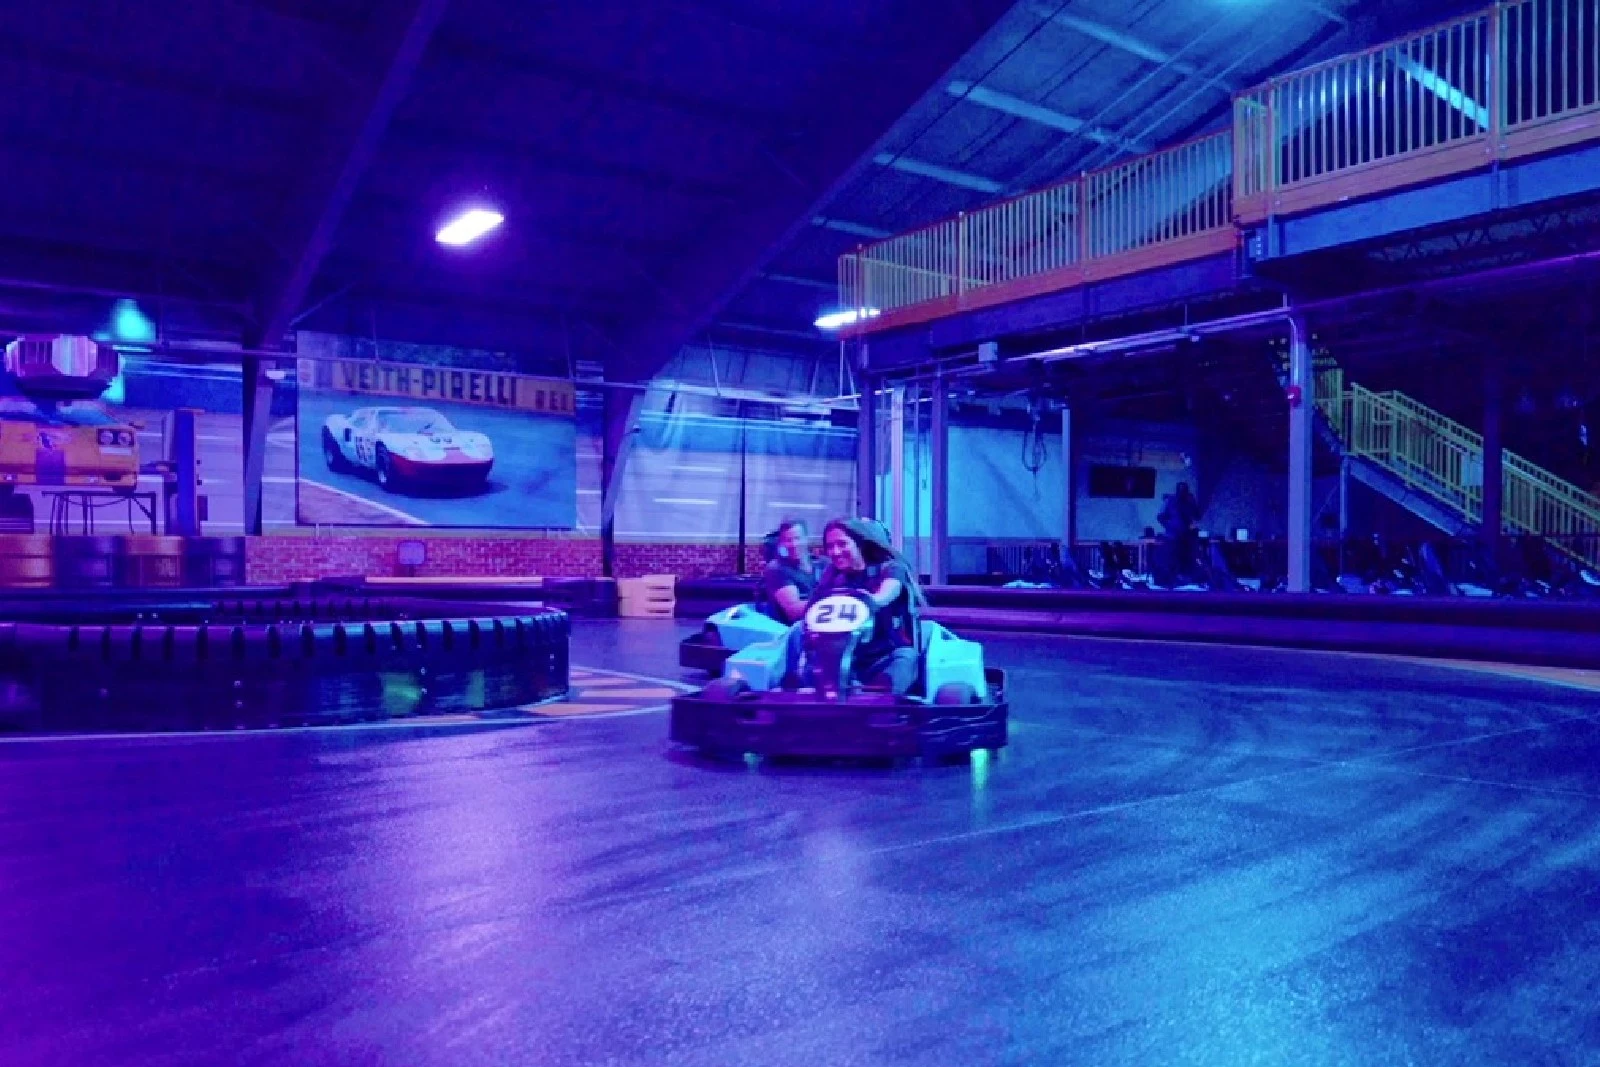 World's largest' go-kart track to open in N.J. before the holidays